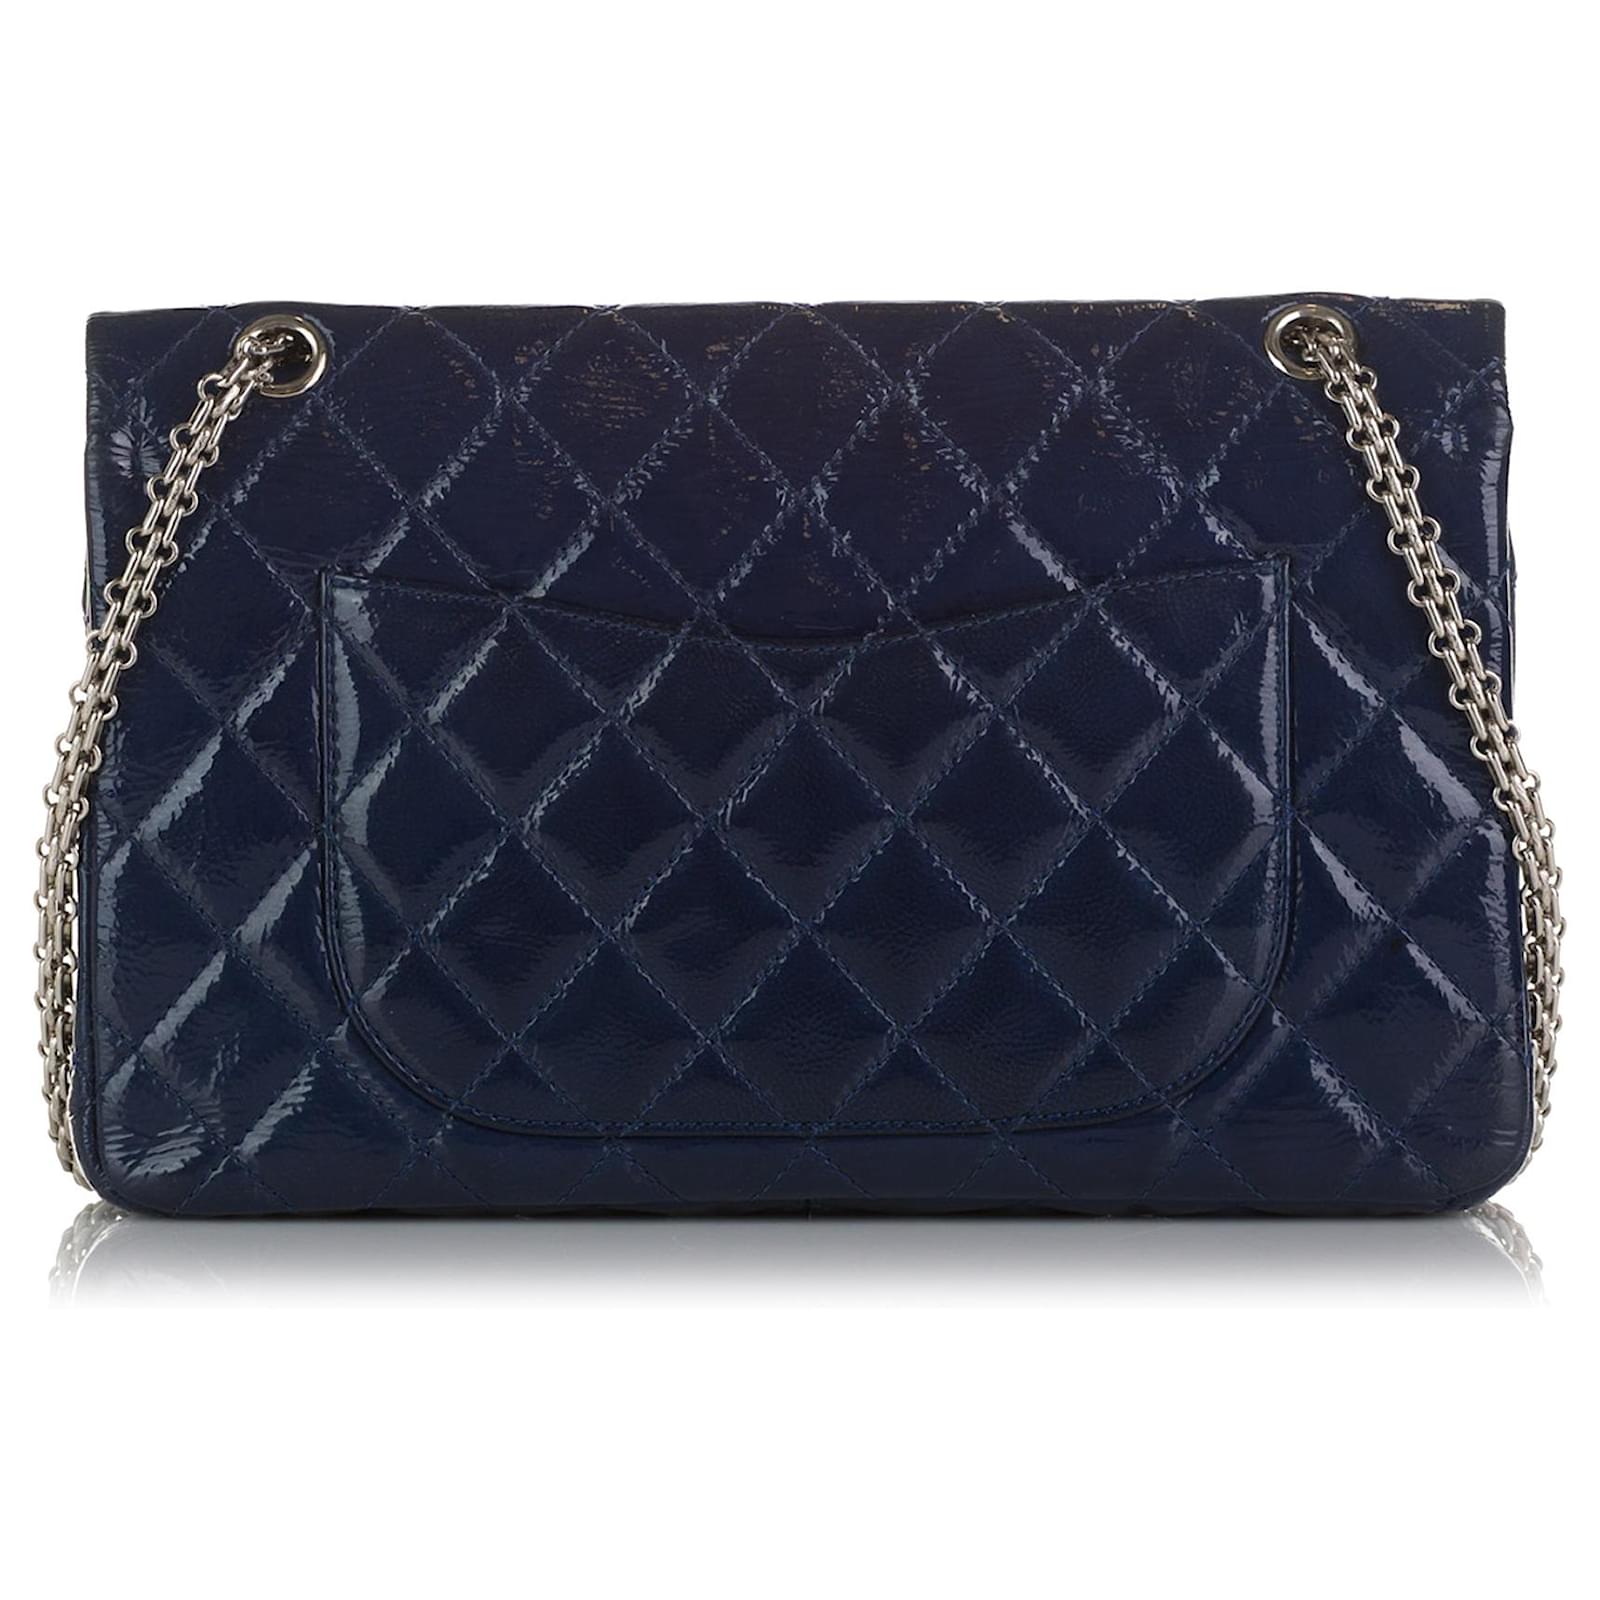 Chanel Blue Medium Reissue Double Flap Bag Leather Patent leather